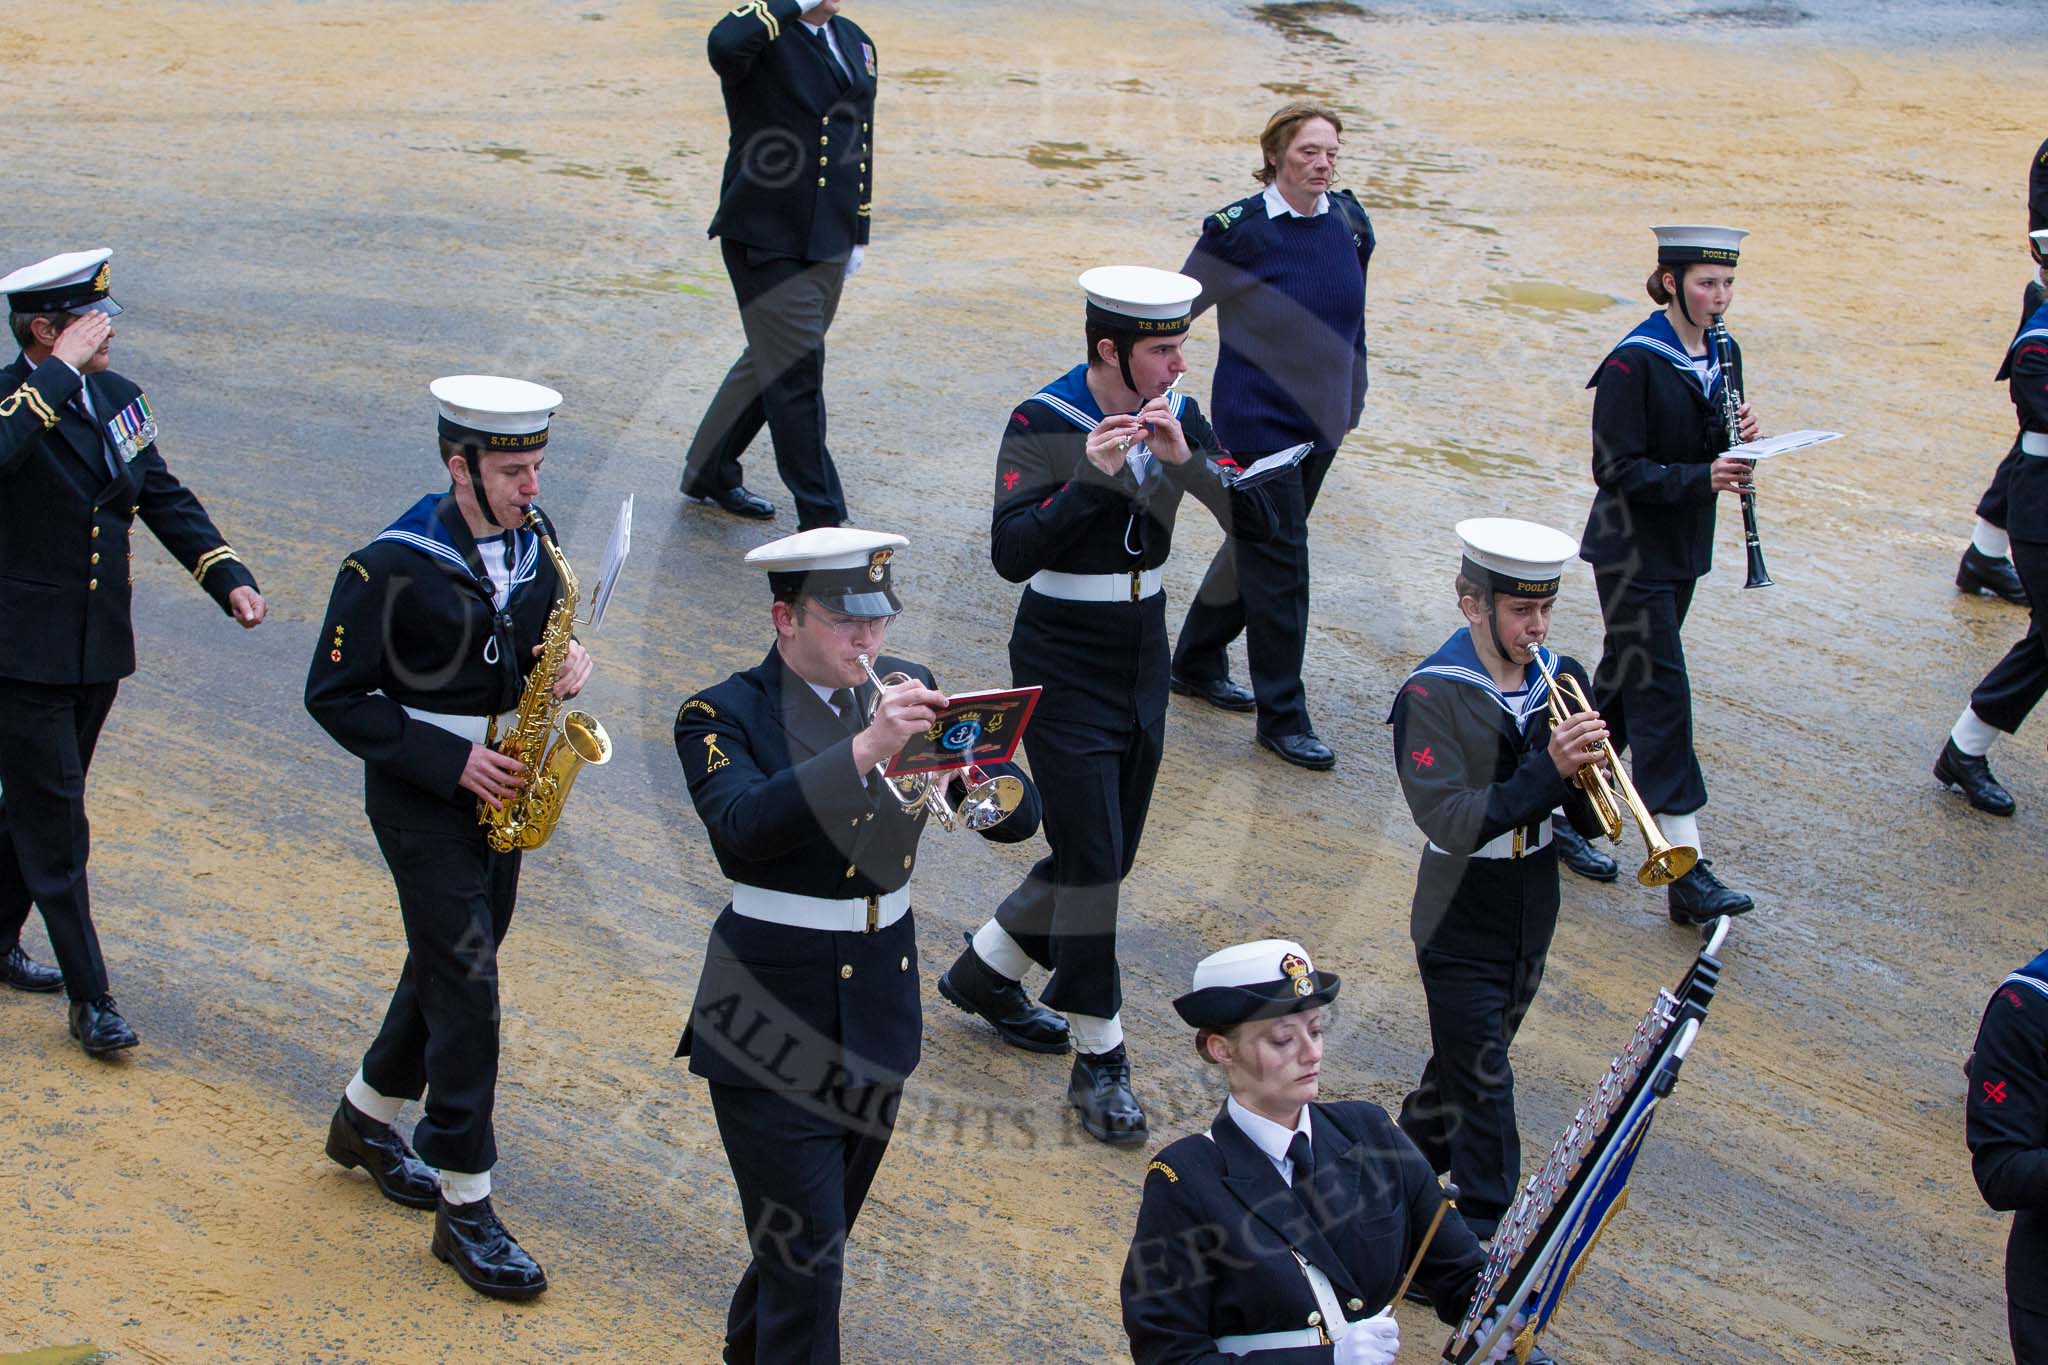 Lord Mayor's Show 2012: Entry 98 - Sea Cadet Corps Band..
Press stand opposite Mansion House, City of London,
London,
Greater London,
United Kingdom,
on 10 November 2012 at 11:45, image #1317